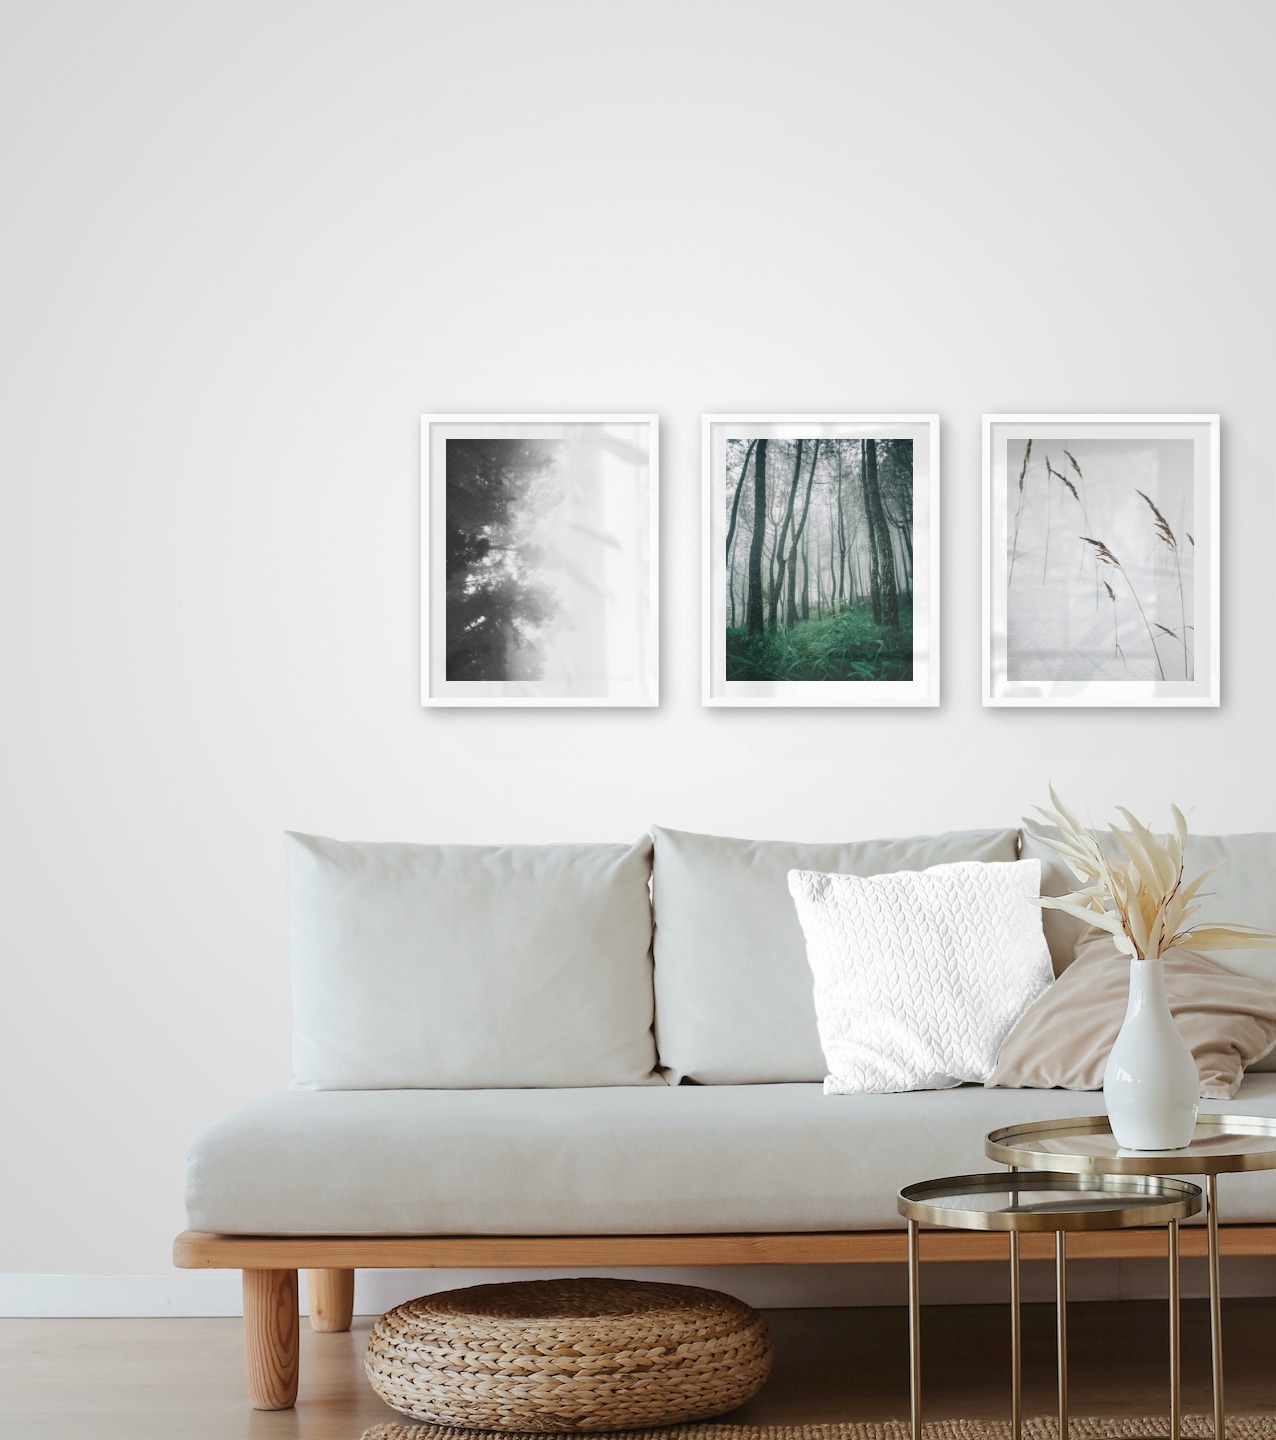 Gallery wall with picture frames in white in sizes 40x50 with prints "Foggy wooden tops from the side", "Tall trees" and "Sharp in the snow"